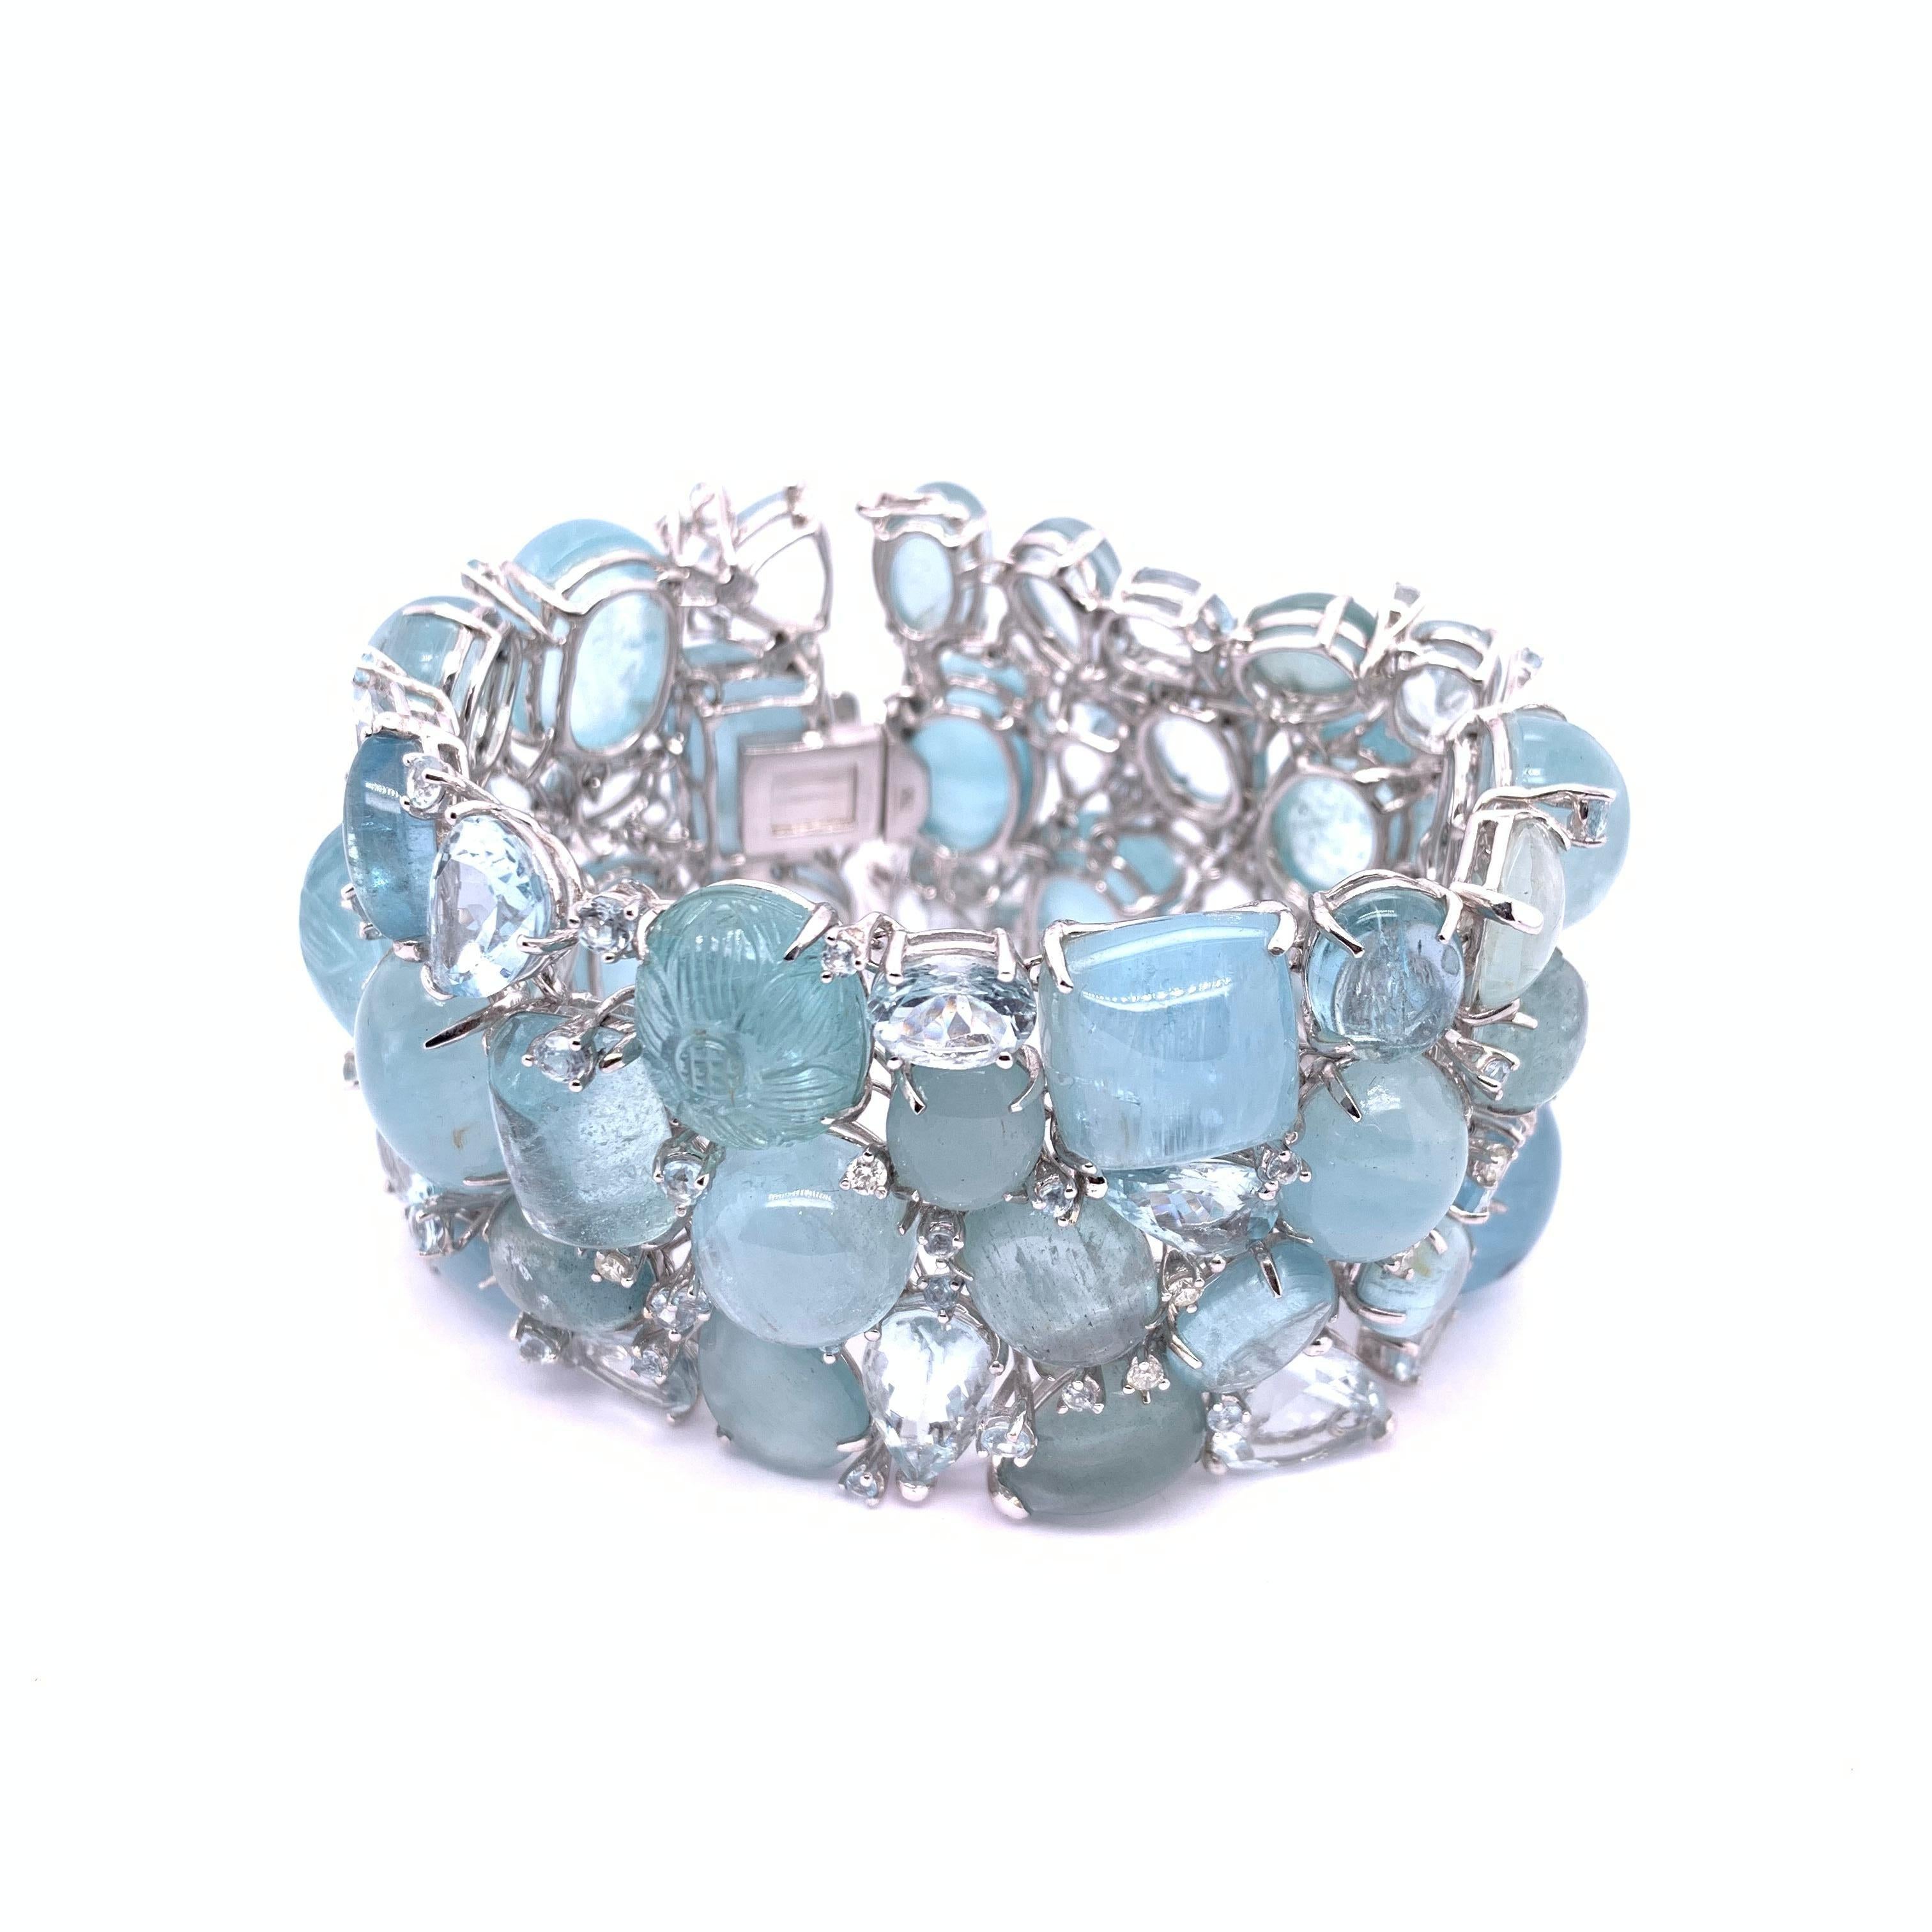 A multi stone aquamarine bracelet, made by Moira, set with mixed cuts of faceted and cabochon aquamarines, weighing an estimated 369.00ct, and round brilliant-cut diamonds weighing an estimated 0.91ct, mounted in 18ct white gold. With a push-in